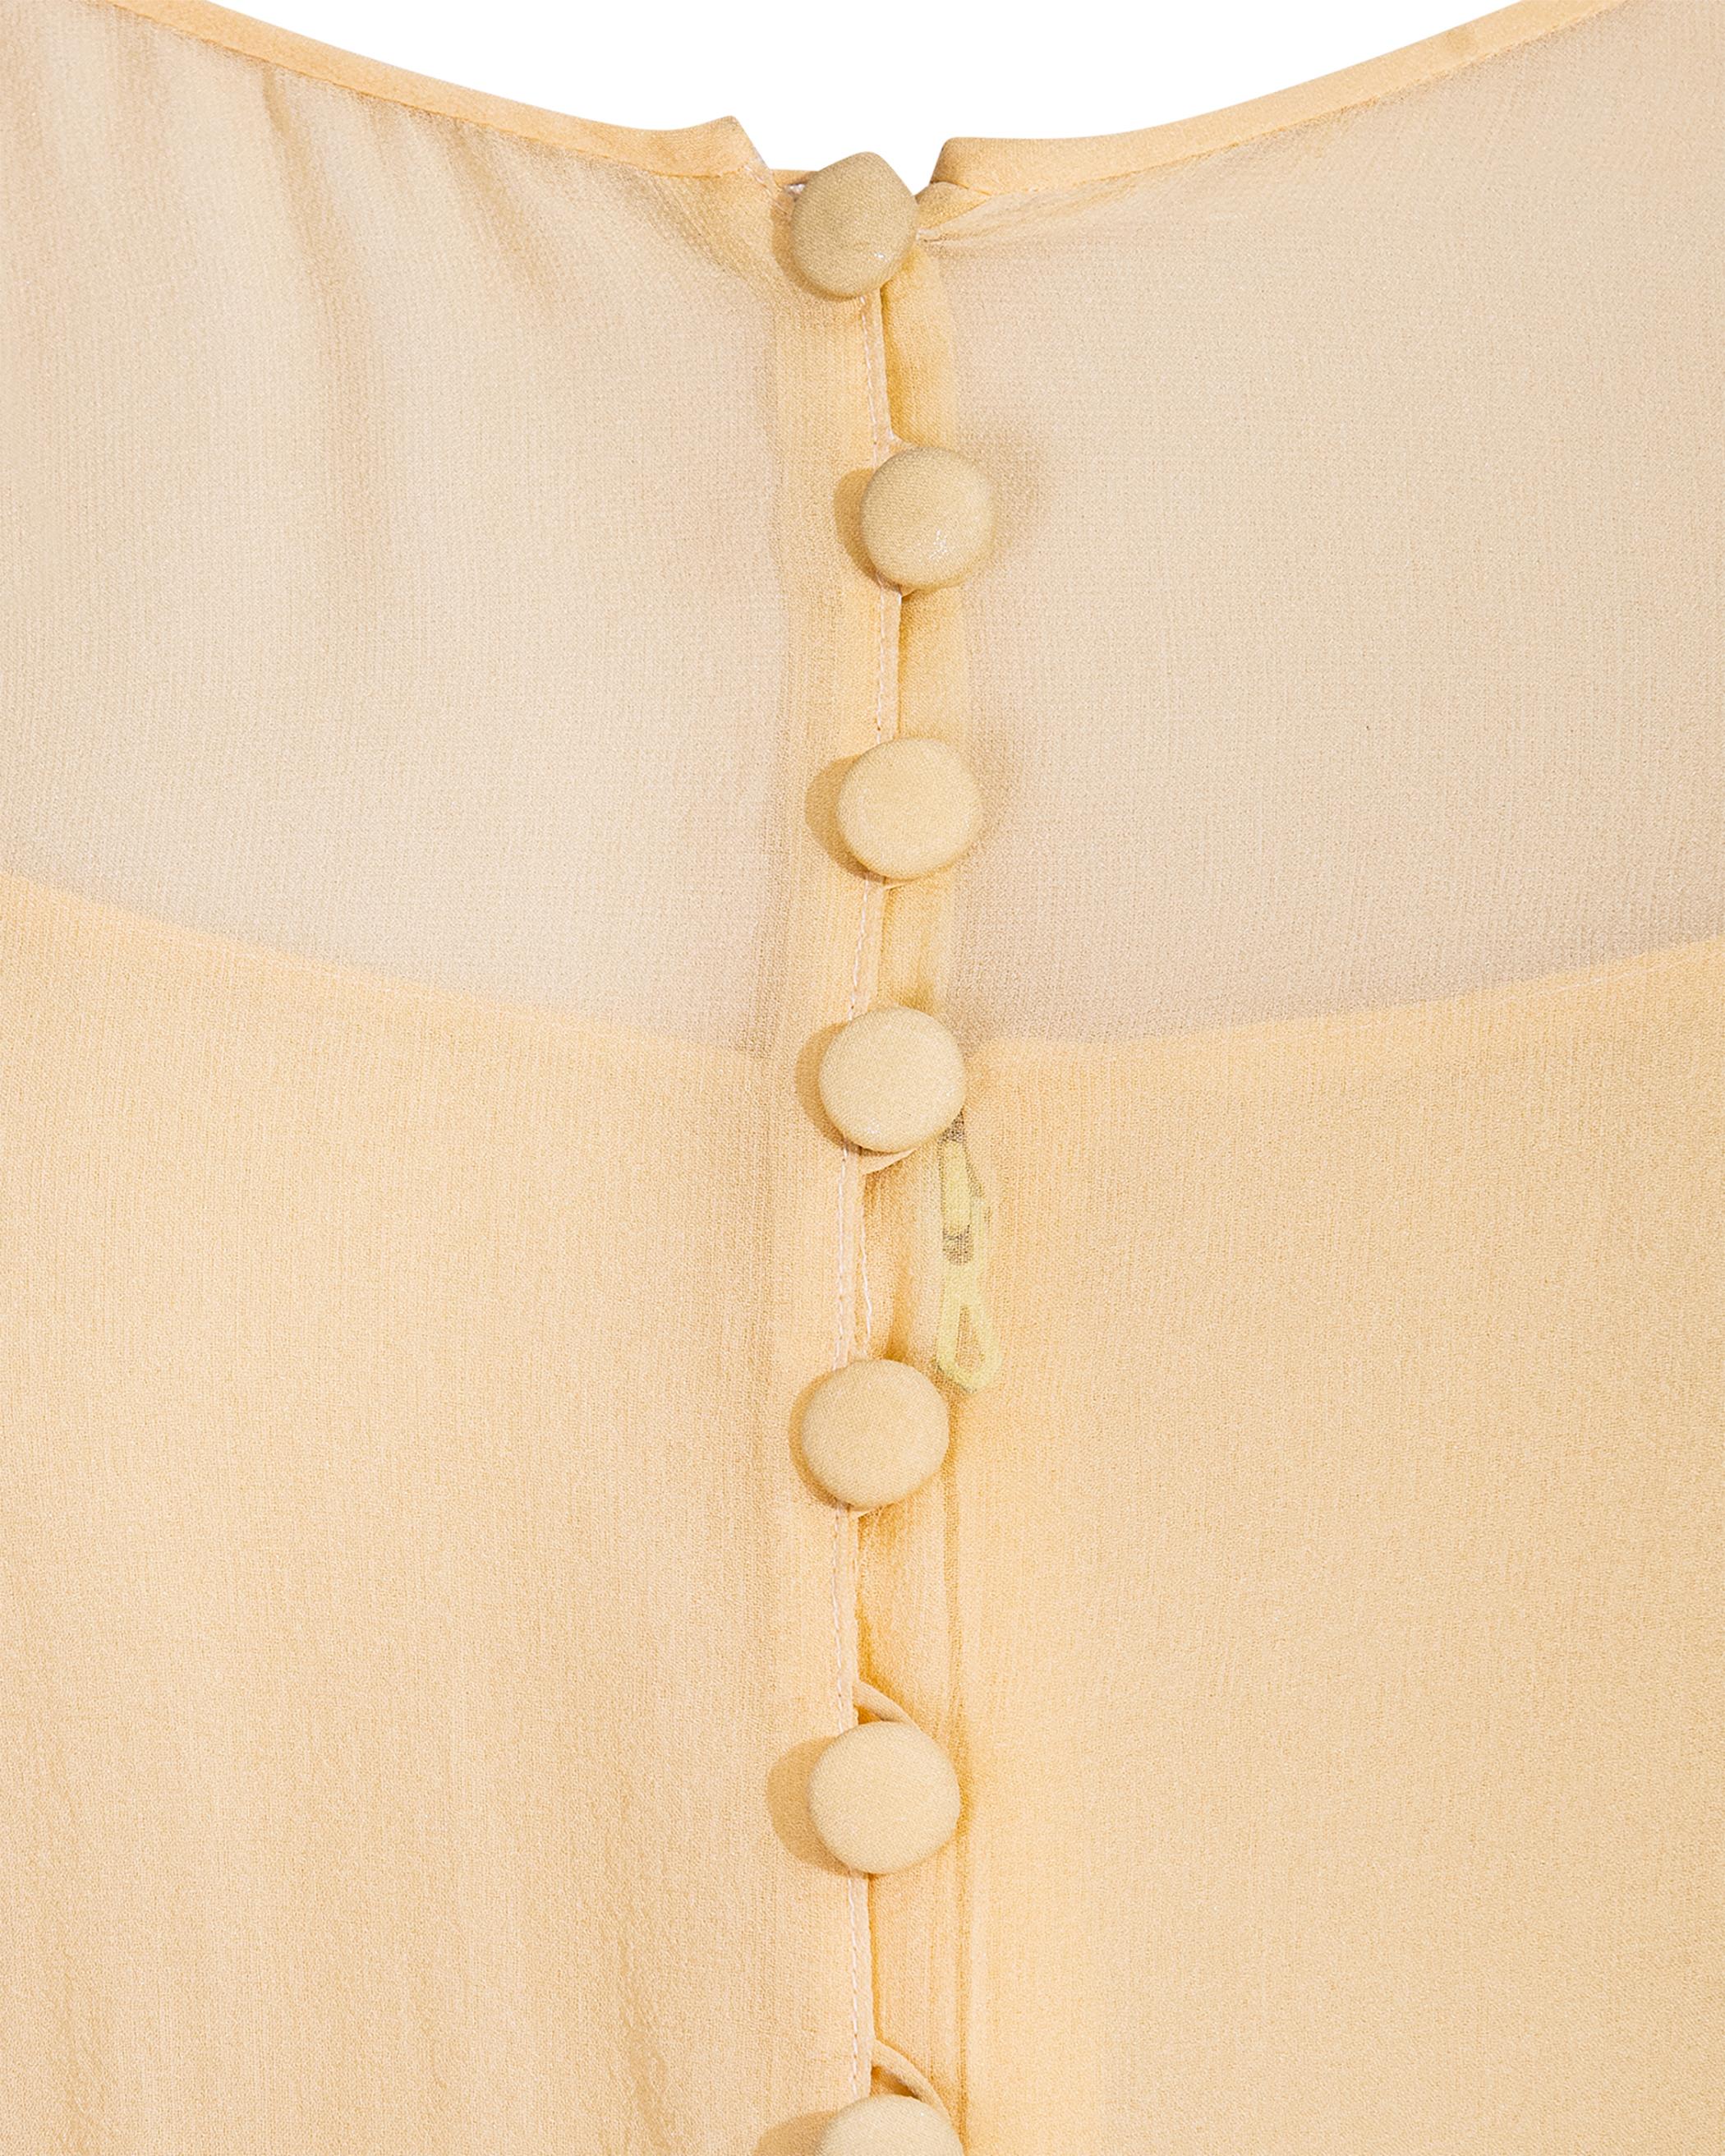 S/S 1984 Chanel by Karl Lagerfeld Butter Yellow Silk Chiffon Gown 4